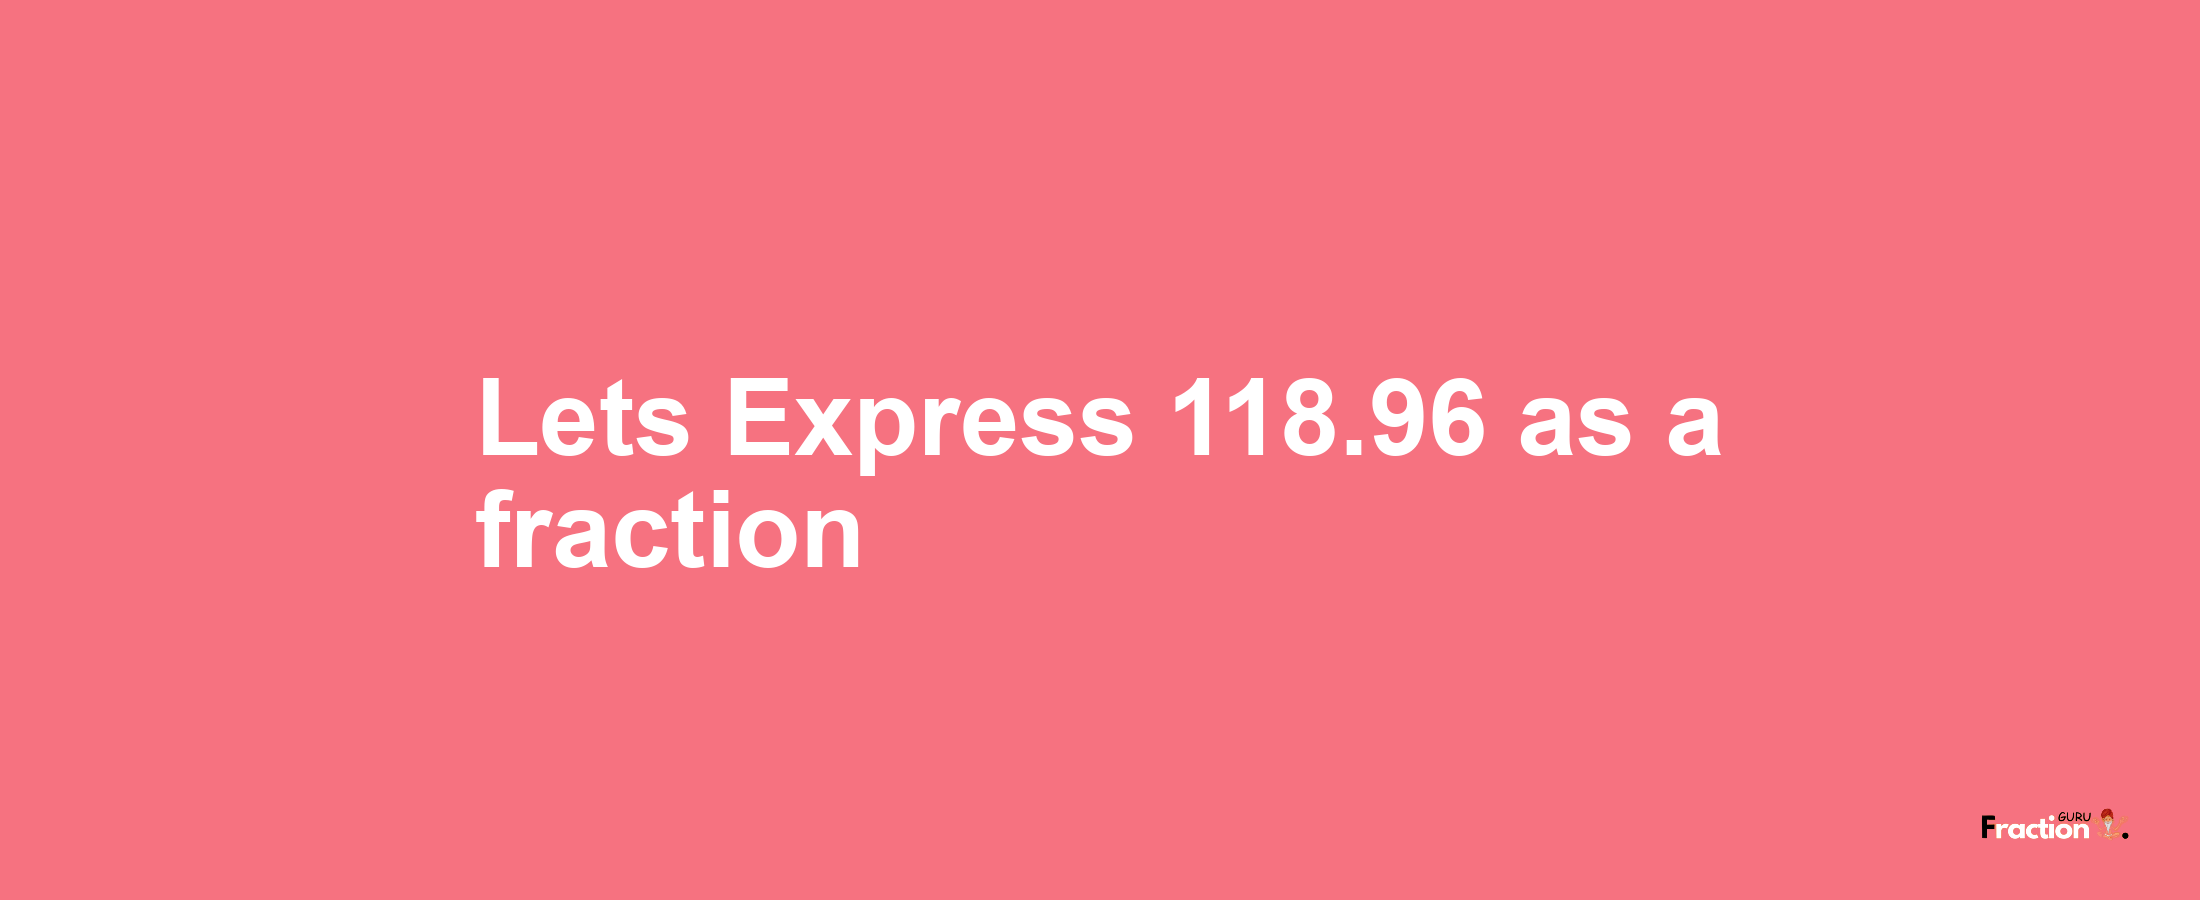 Lets Express 118.96 as afraction